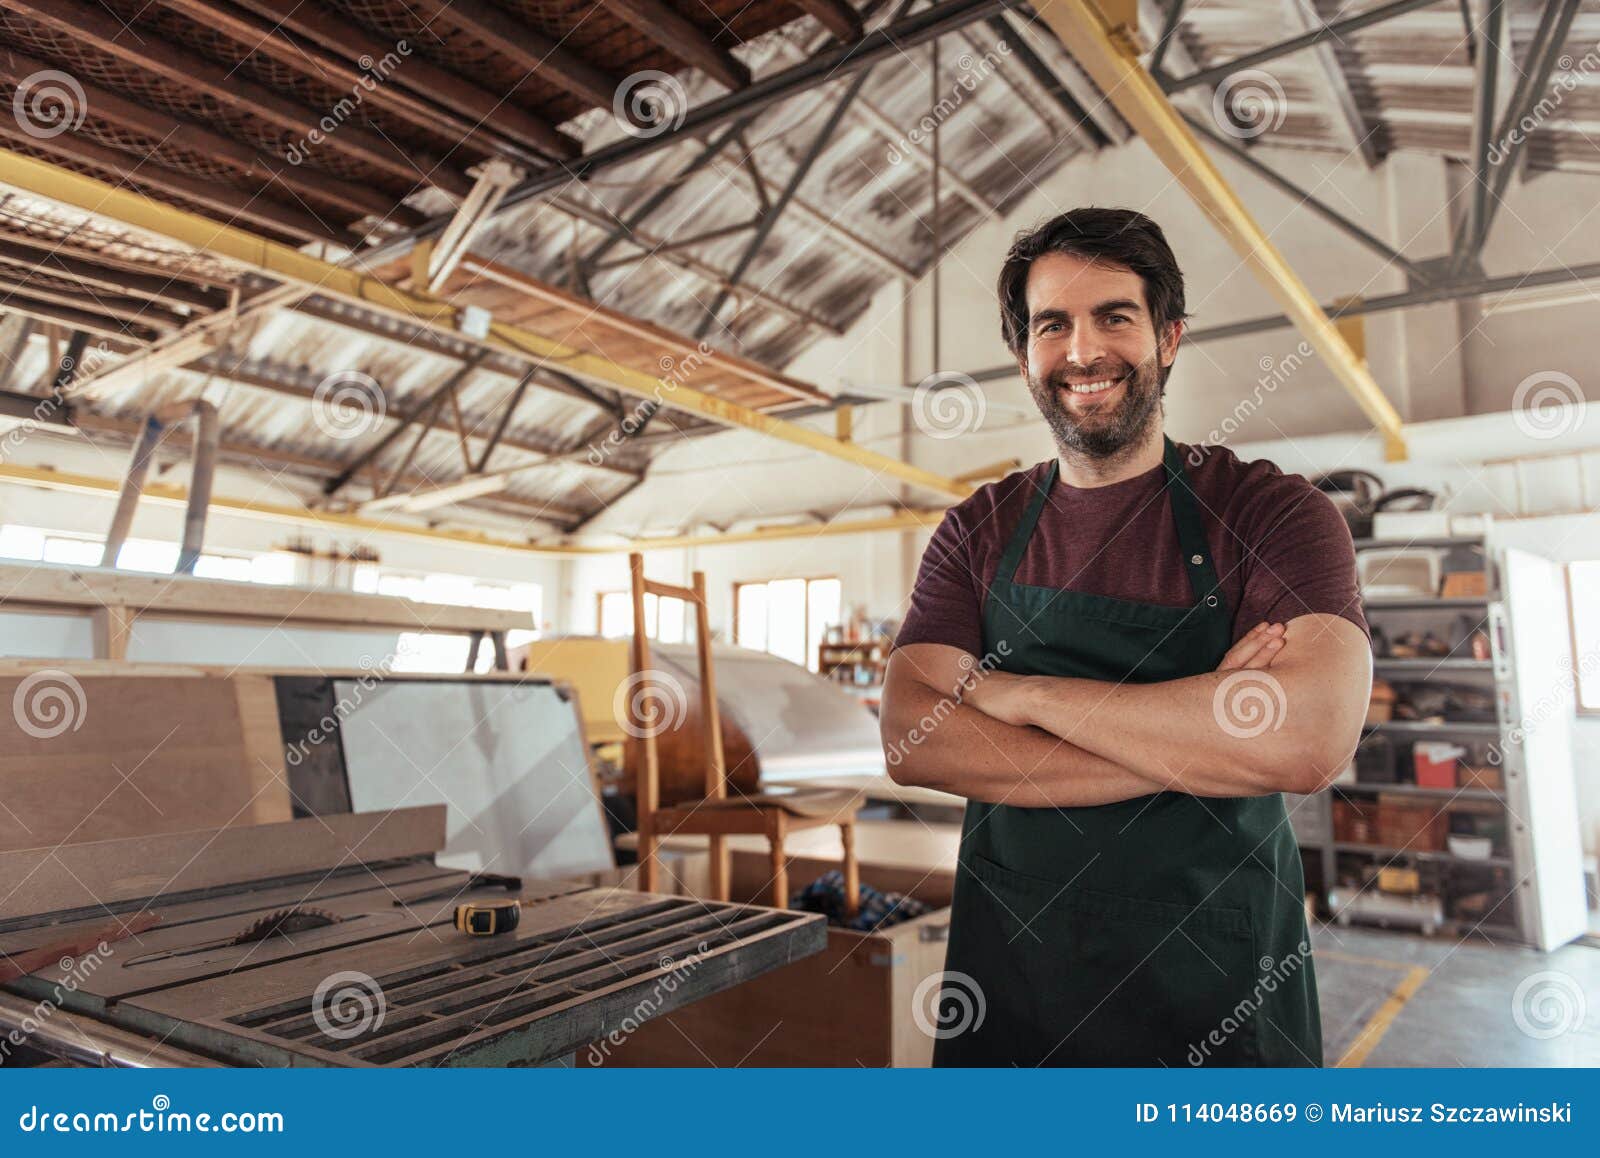 smiling woodworker standing in his workshop by a bench saw